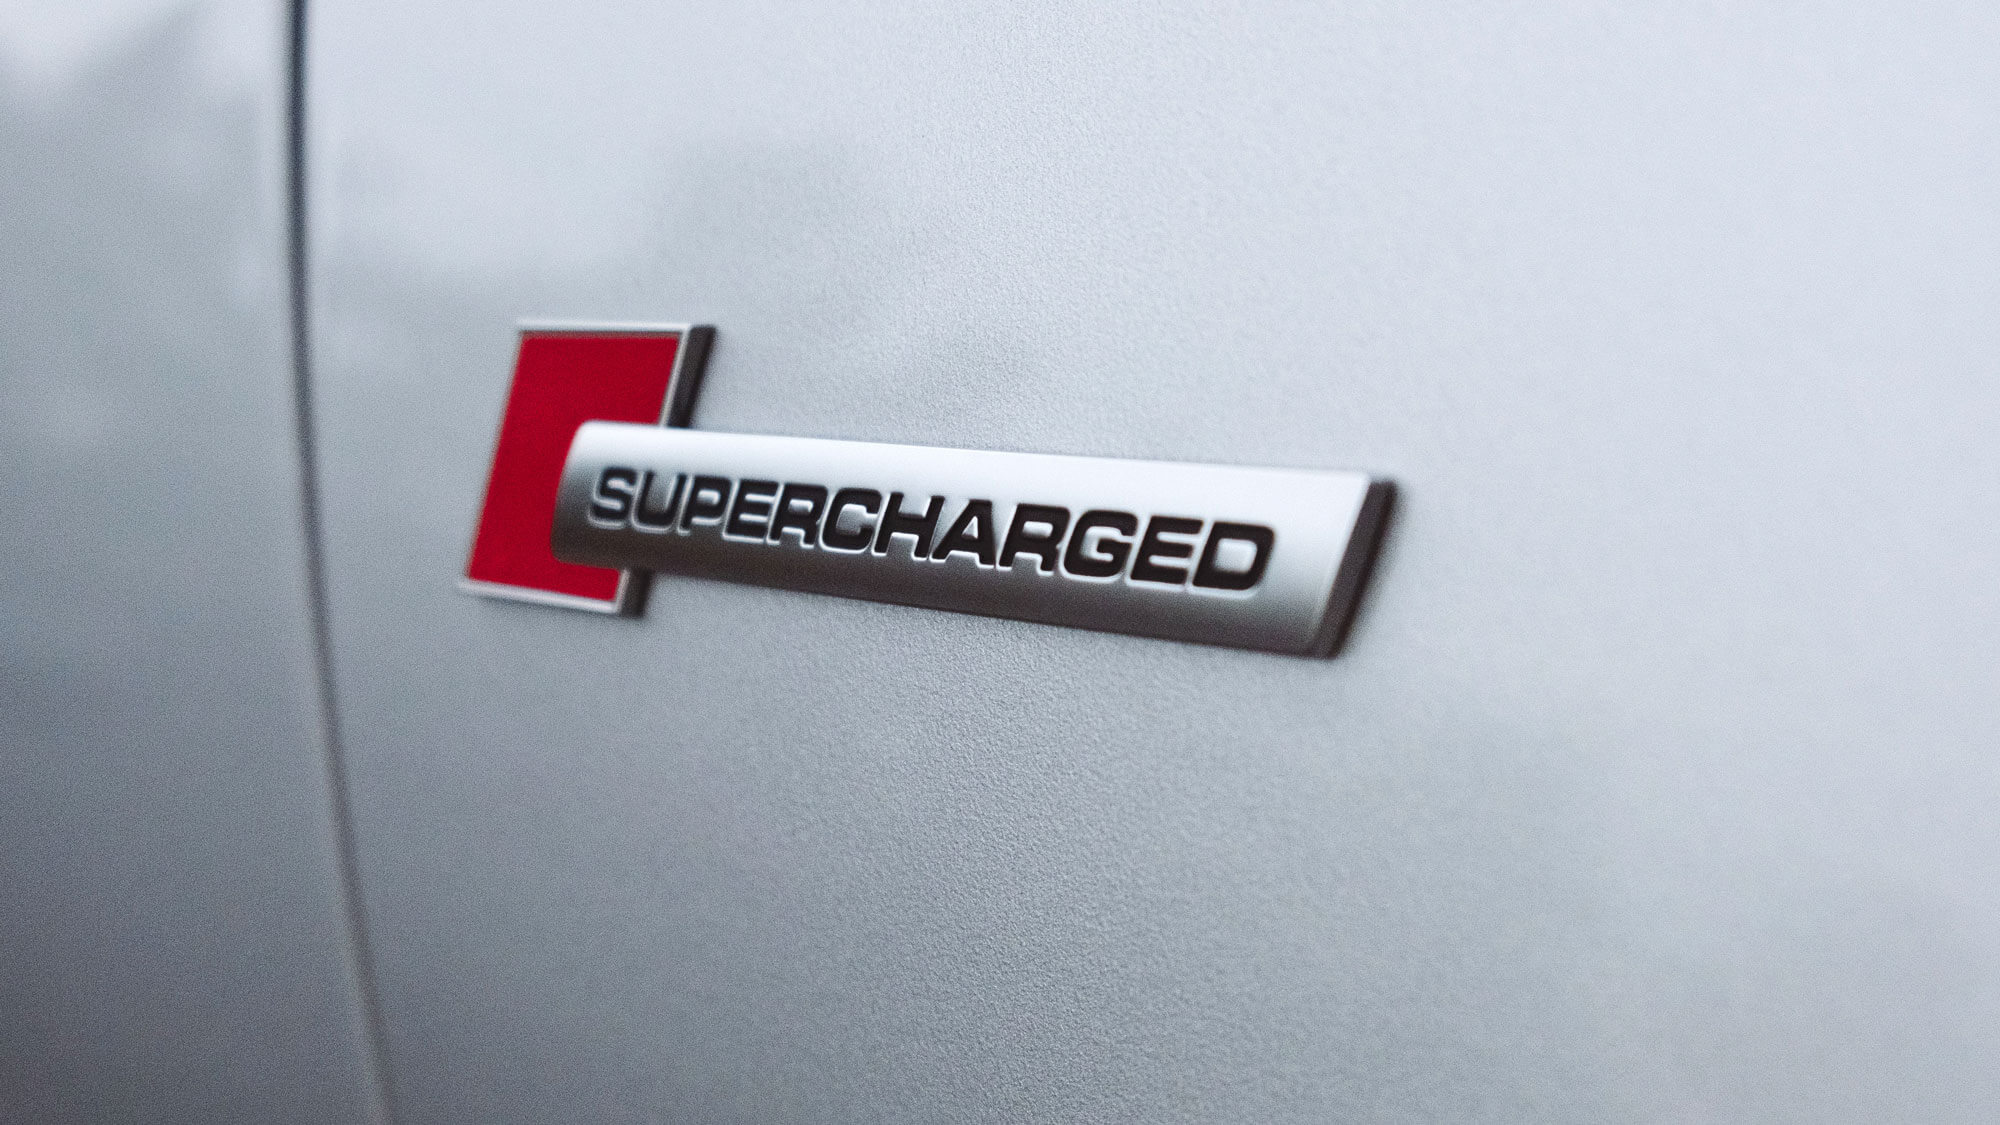 Supercharge innovation